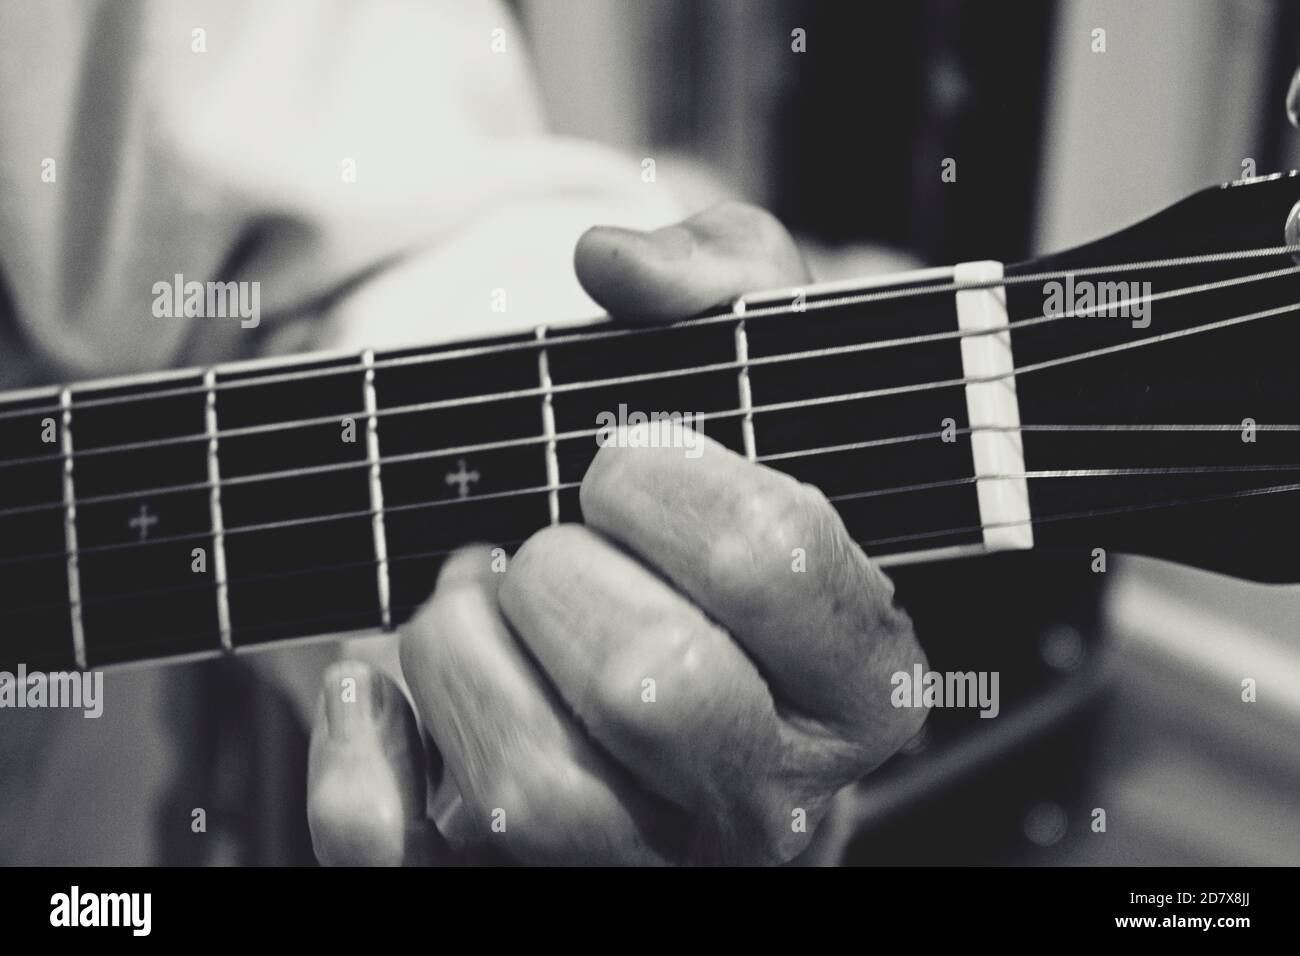 Close up on guitar player with hands on the fretboard, fingerboard, in chord position. Stock Photo